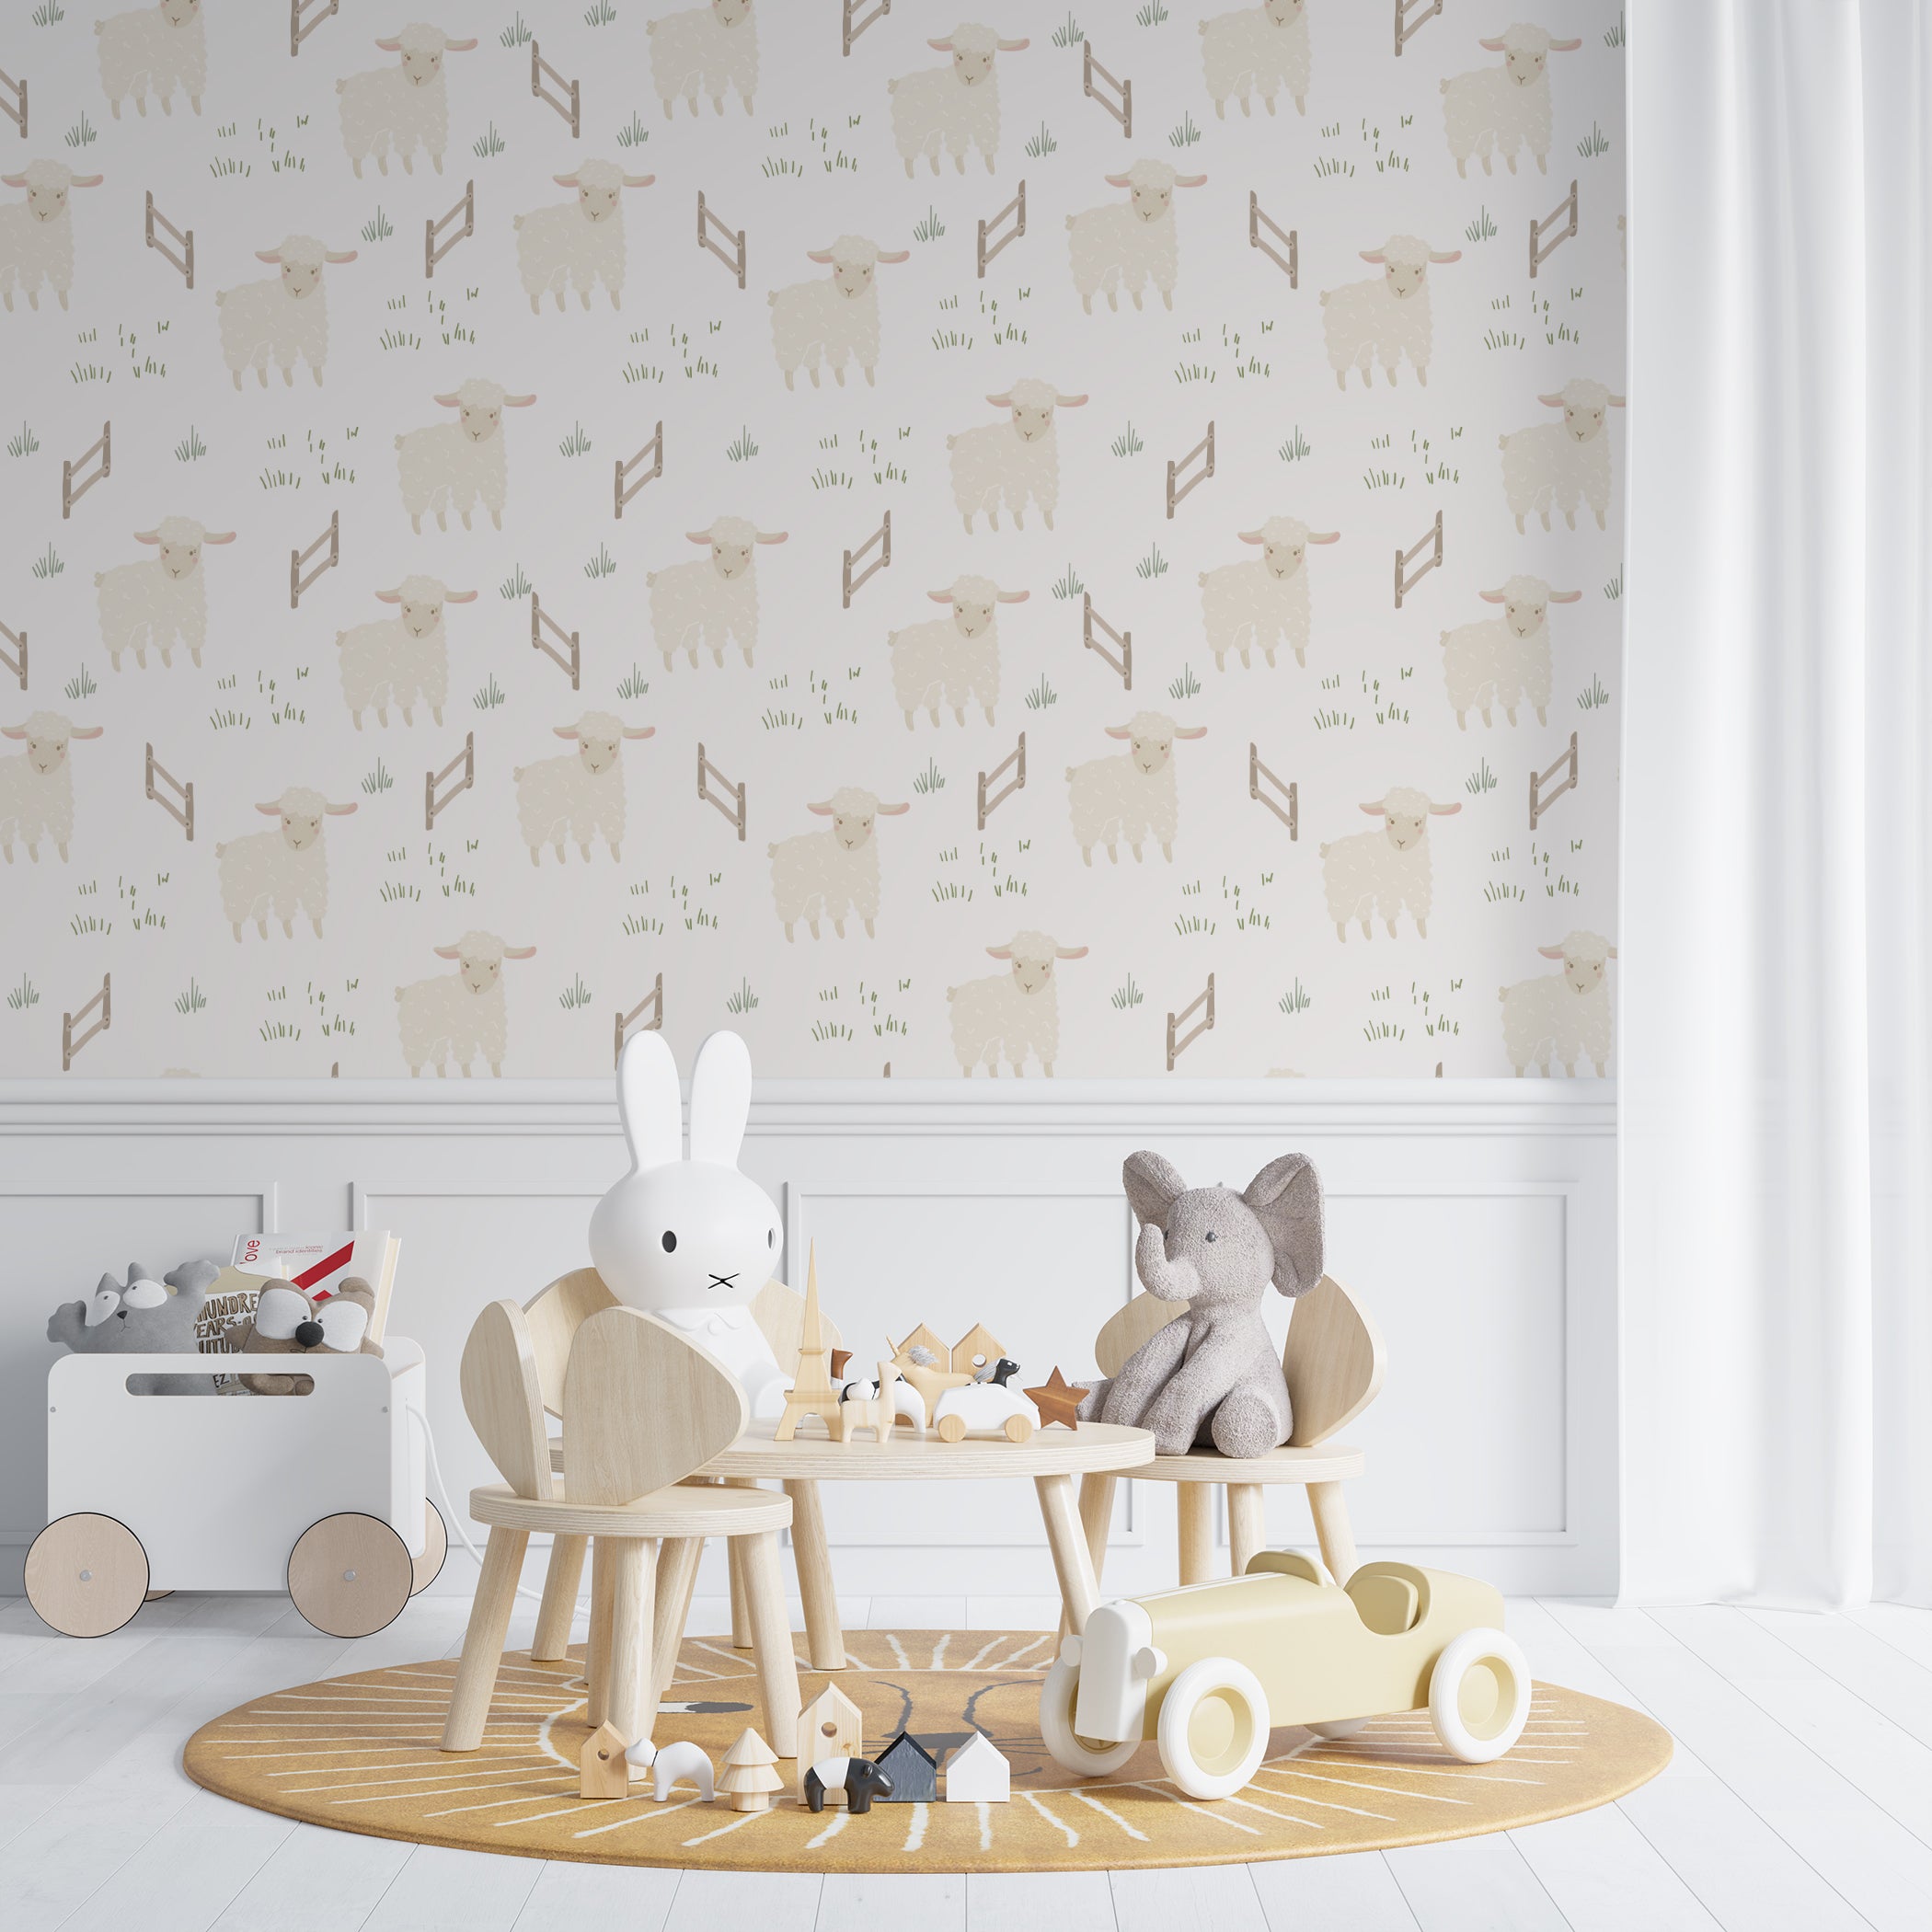 A cozy child's nursery decorated with 'Spring Farm Animals - Sheep Wallpaper' showing white sheep and fences in a pastoral setting, complemented by child-friendly wooden furniture and soft, plush toys for a calming environment